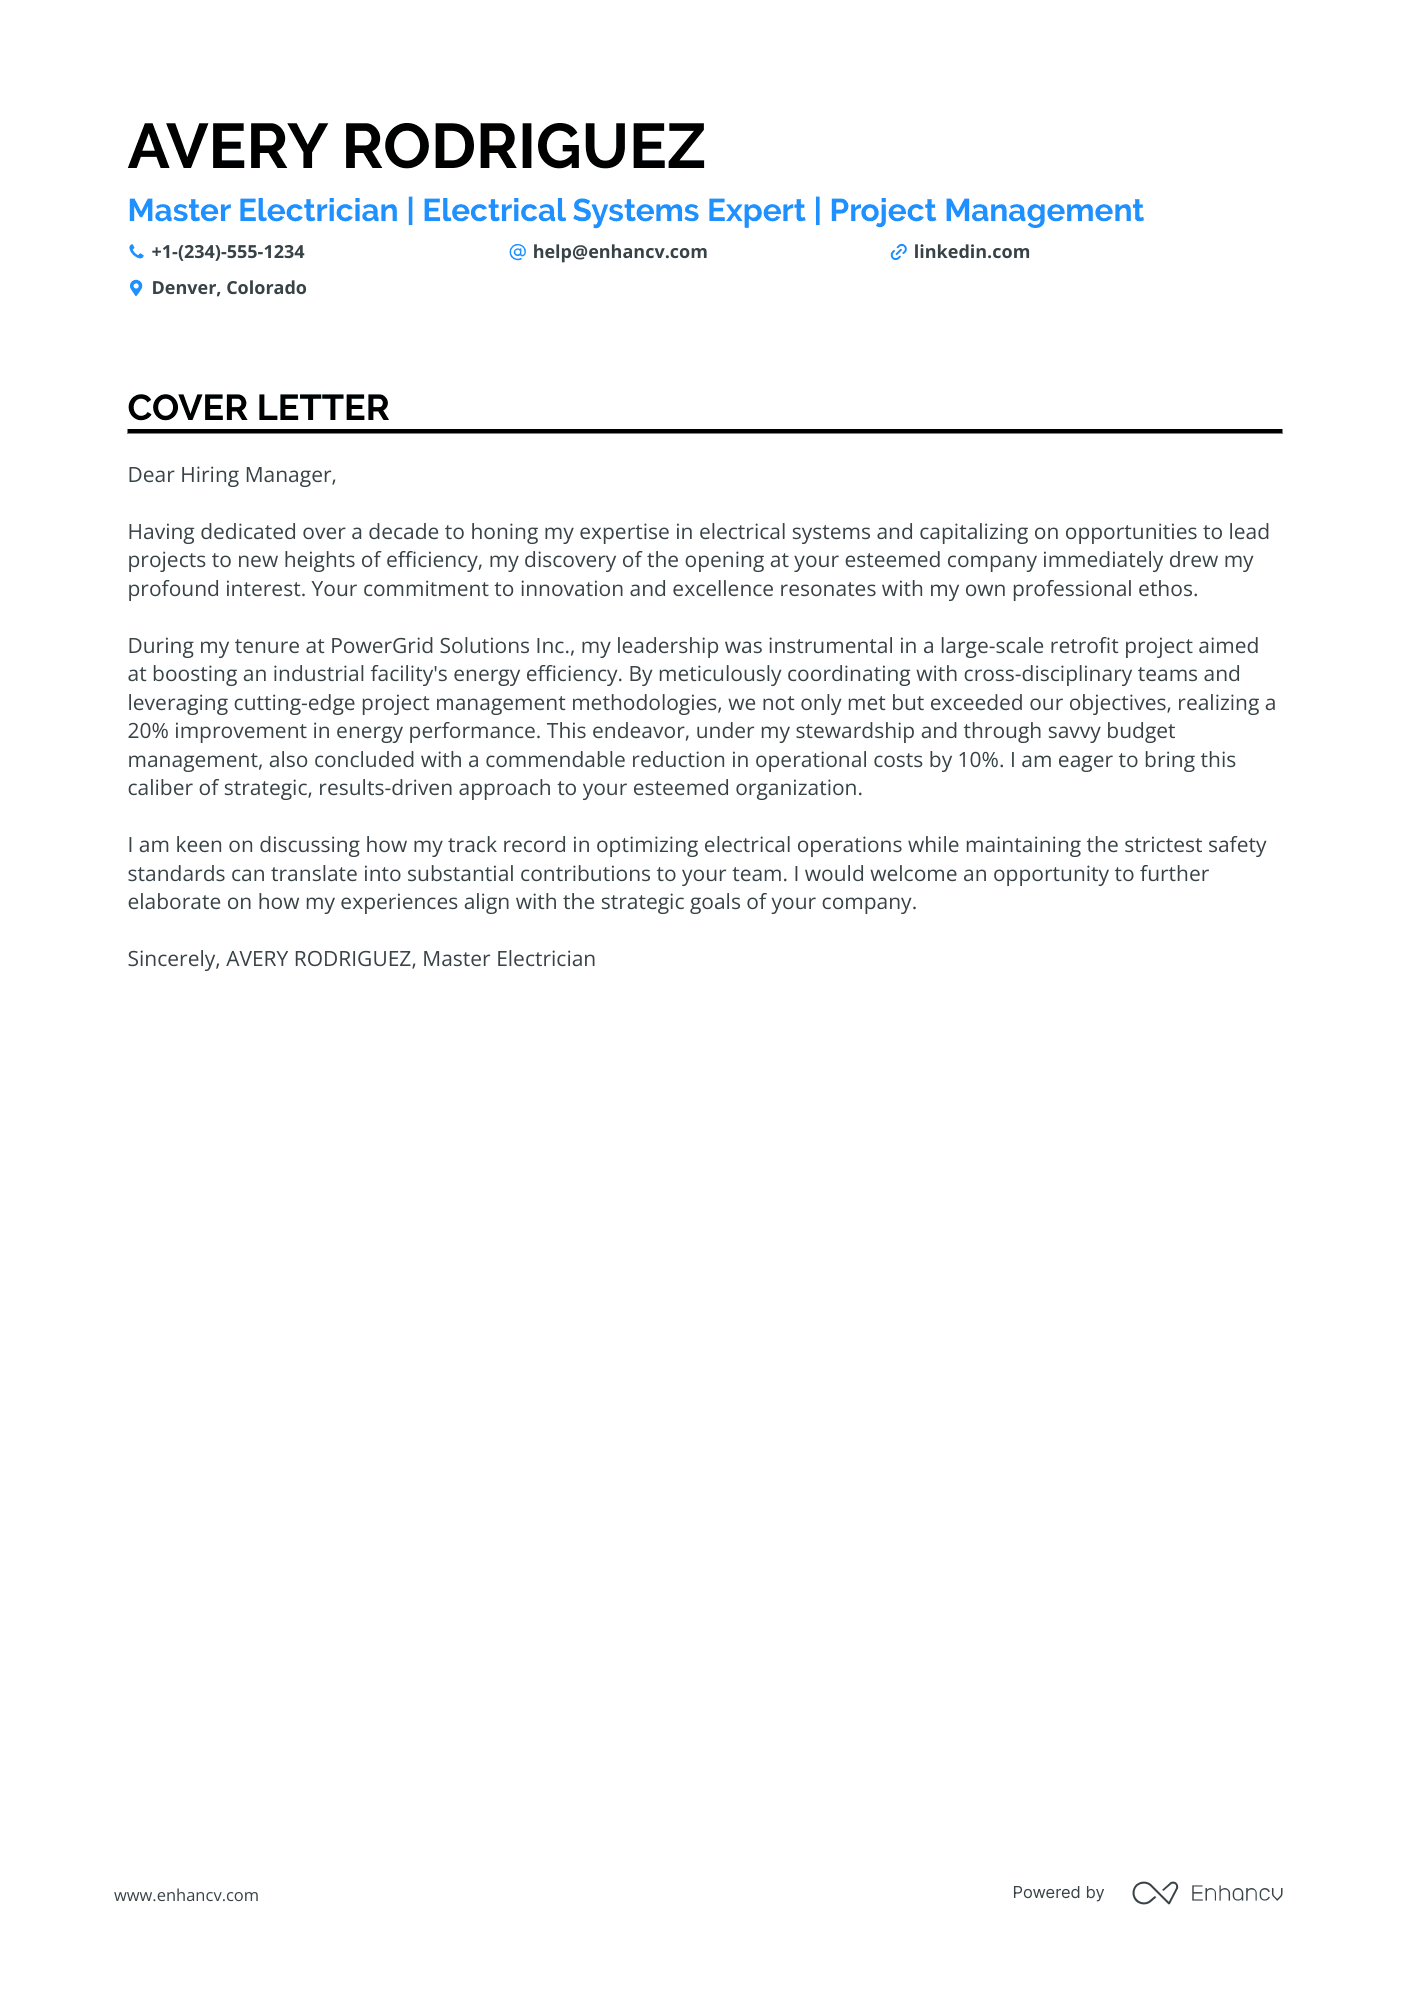 cover letter template for construction job